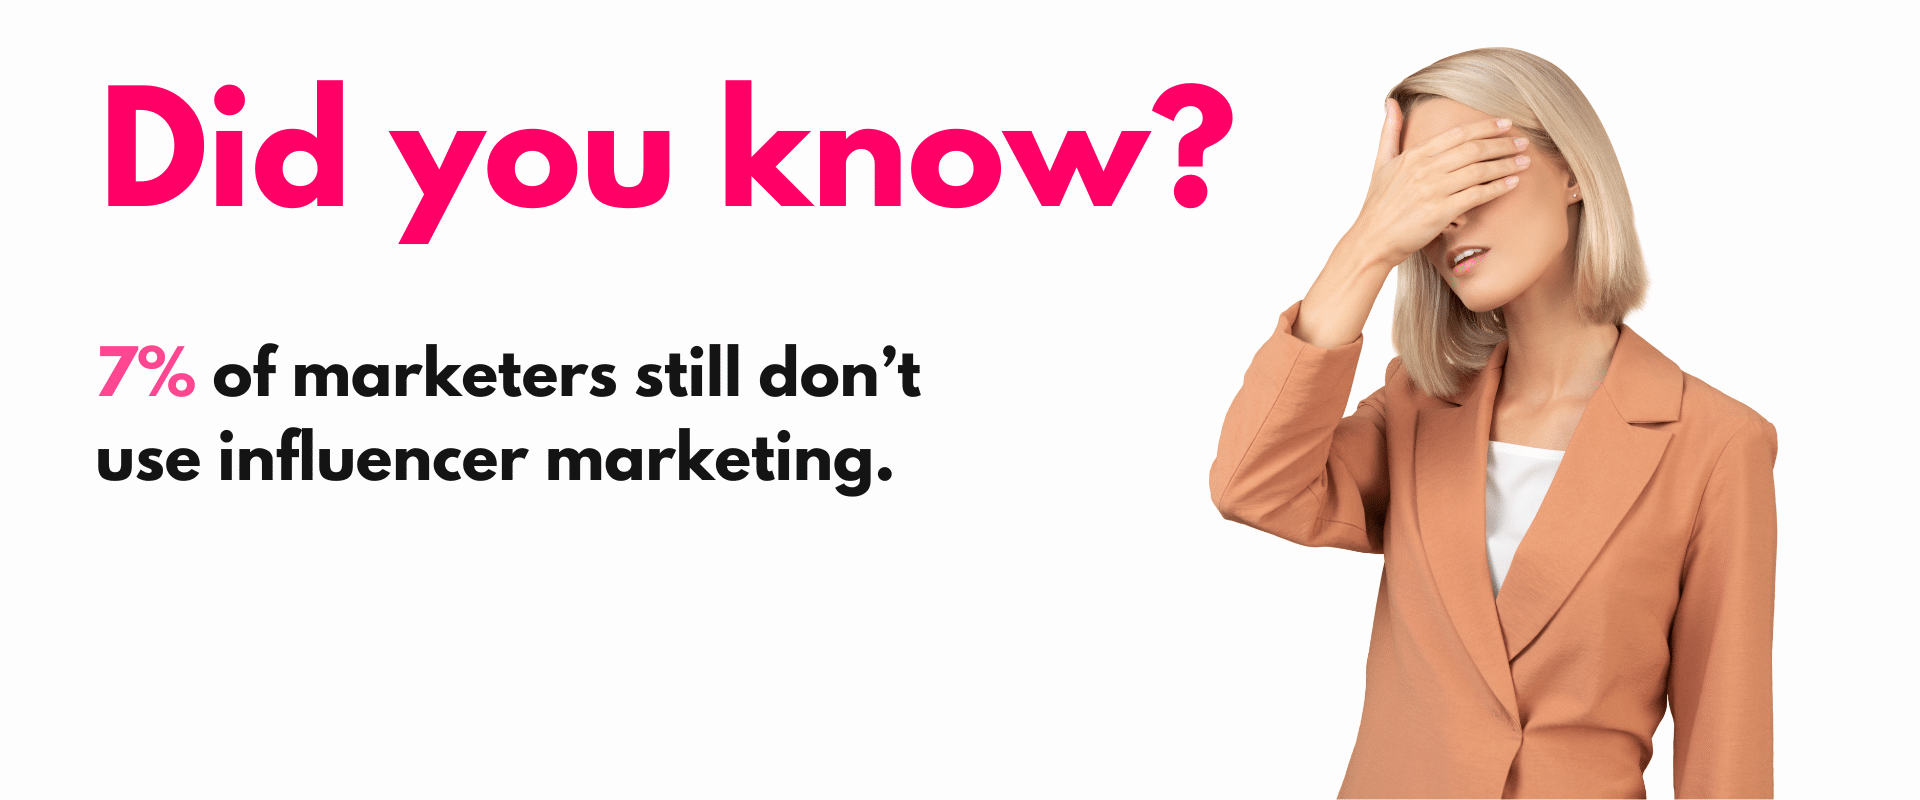 Did you know? 77% of marketers still don't use influence marketing.